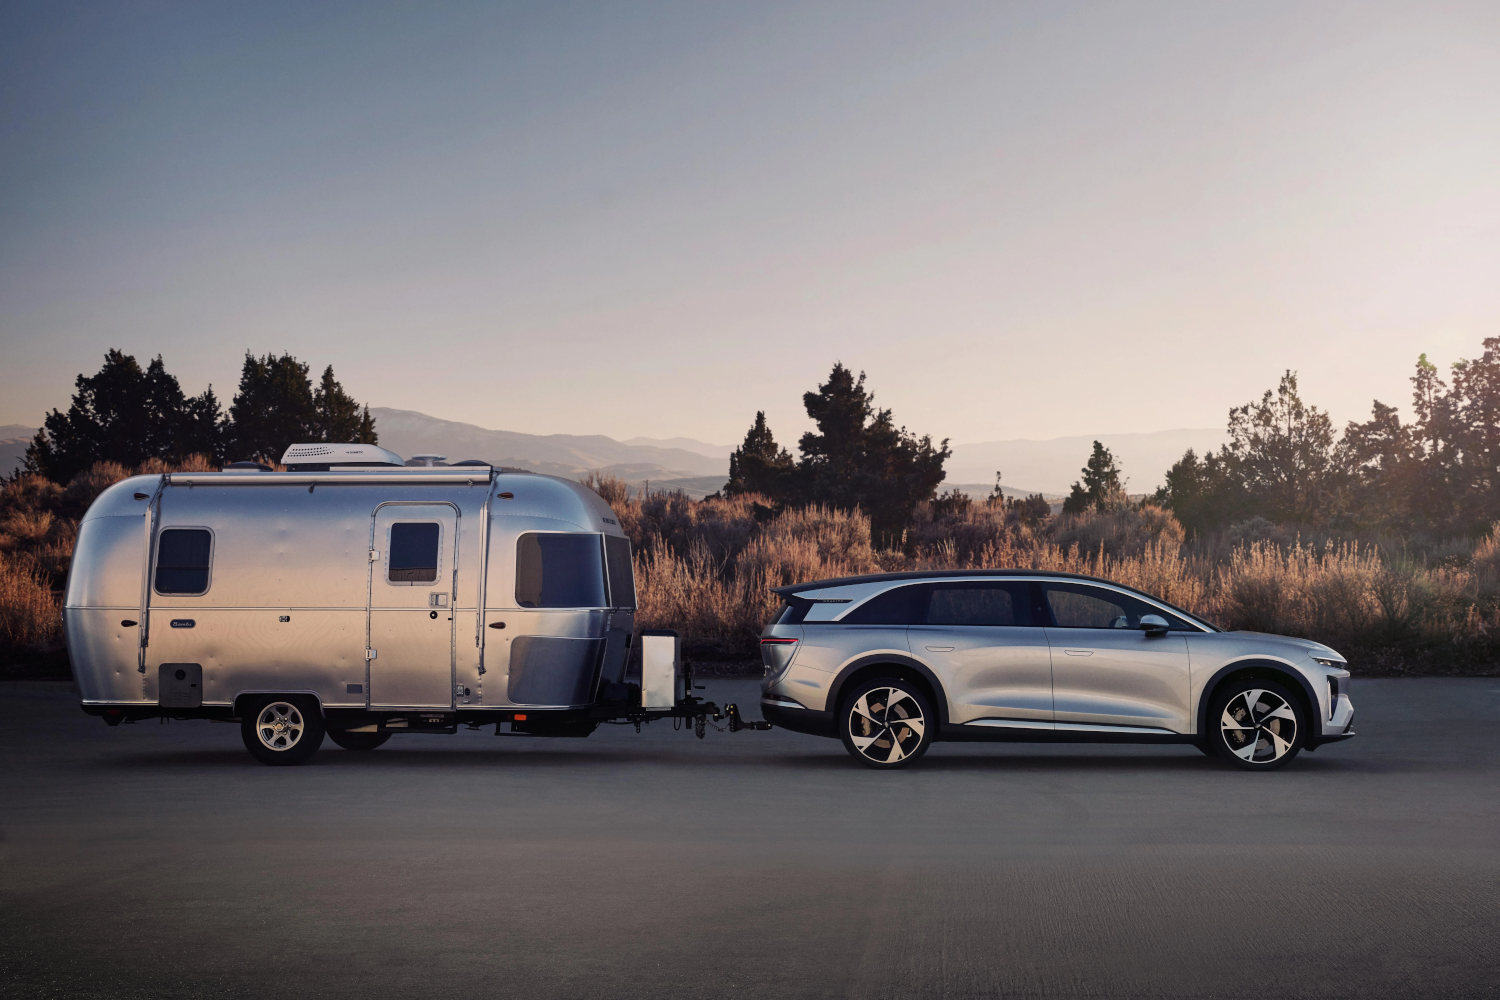 The SUV towing an airstream